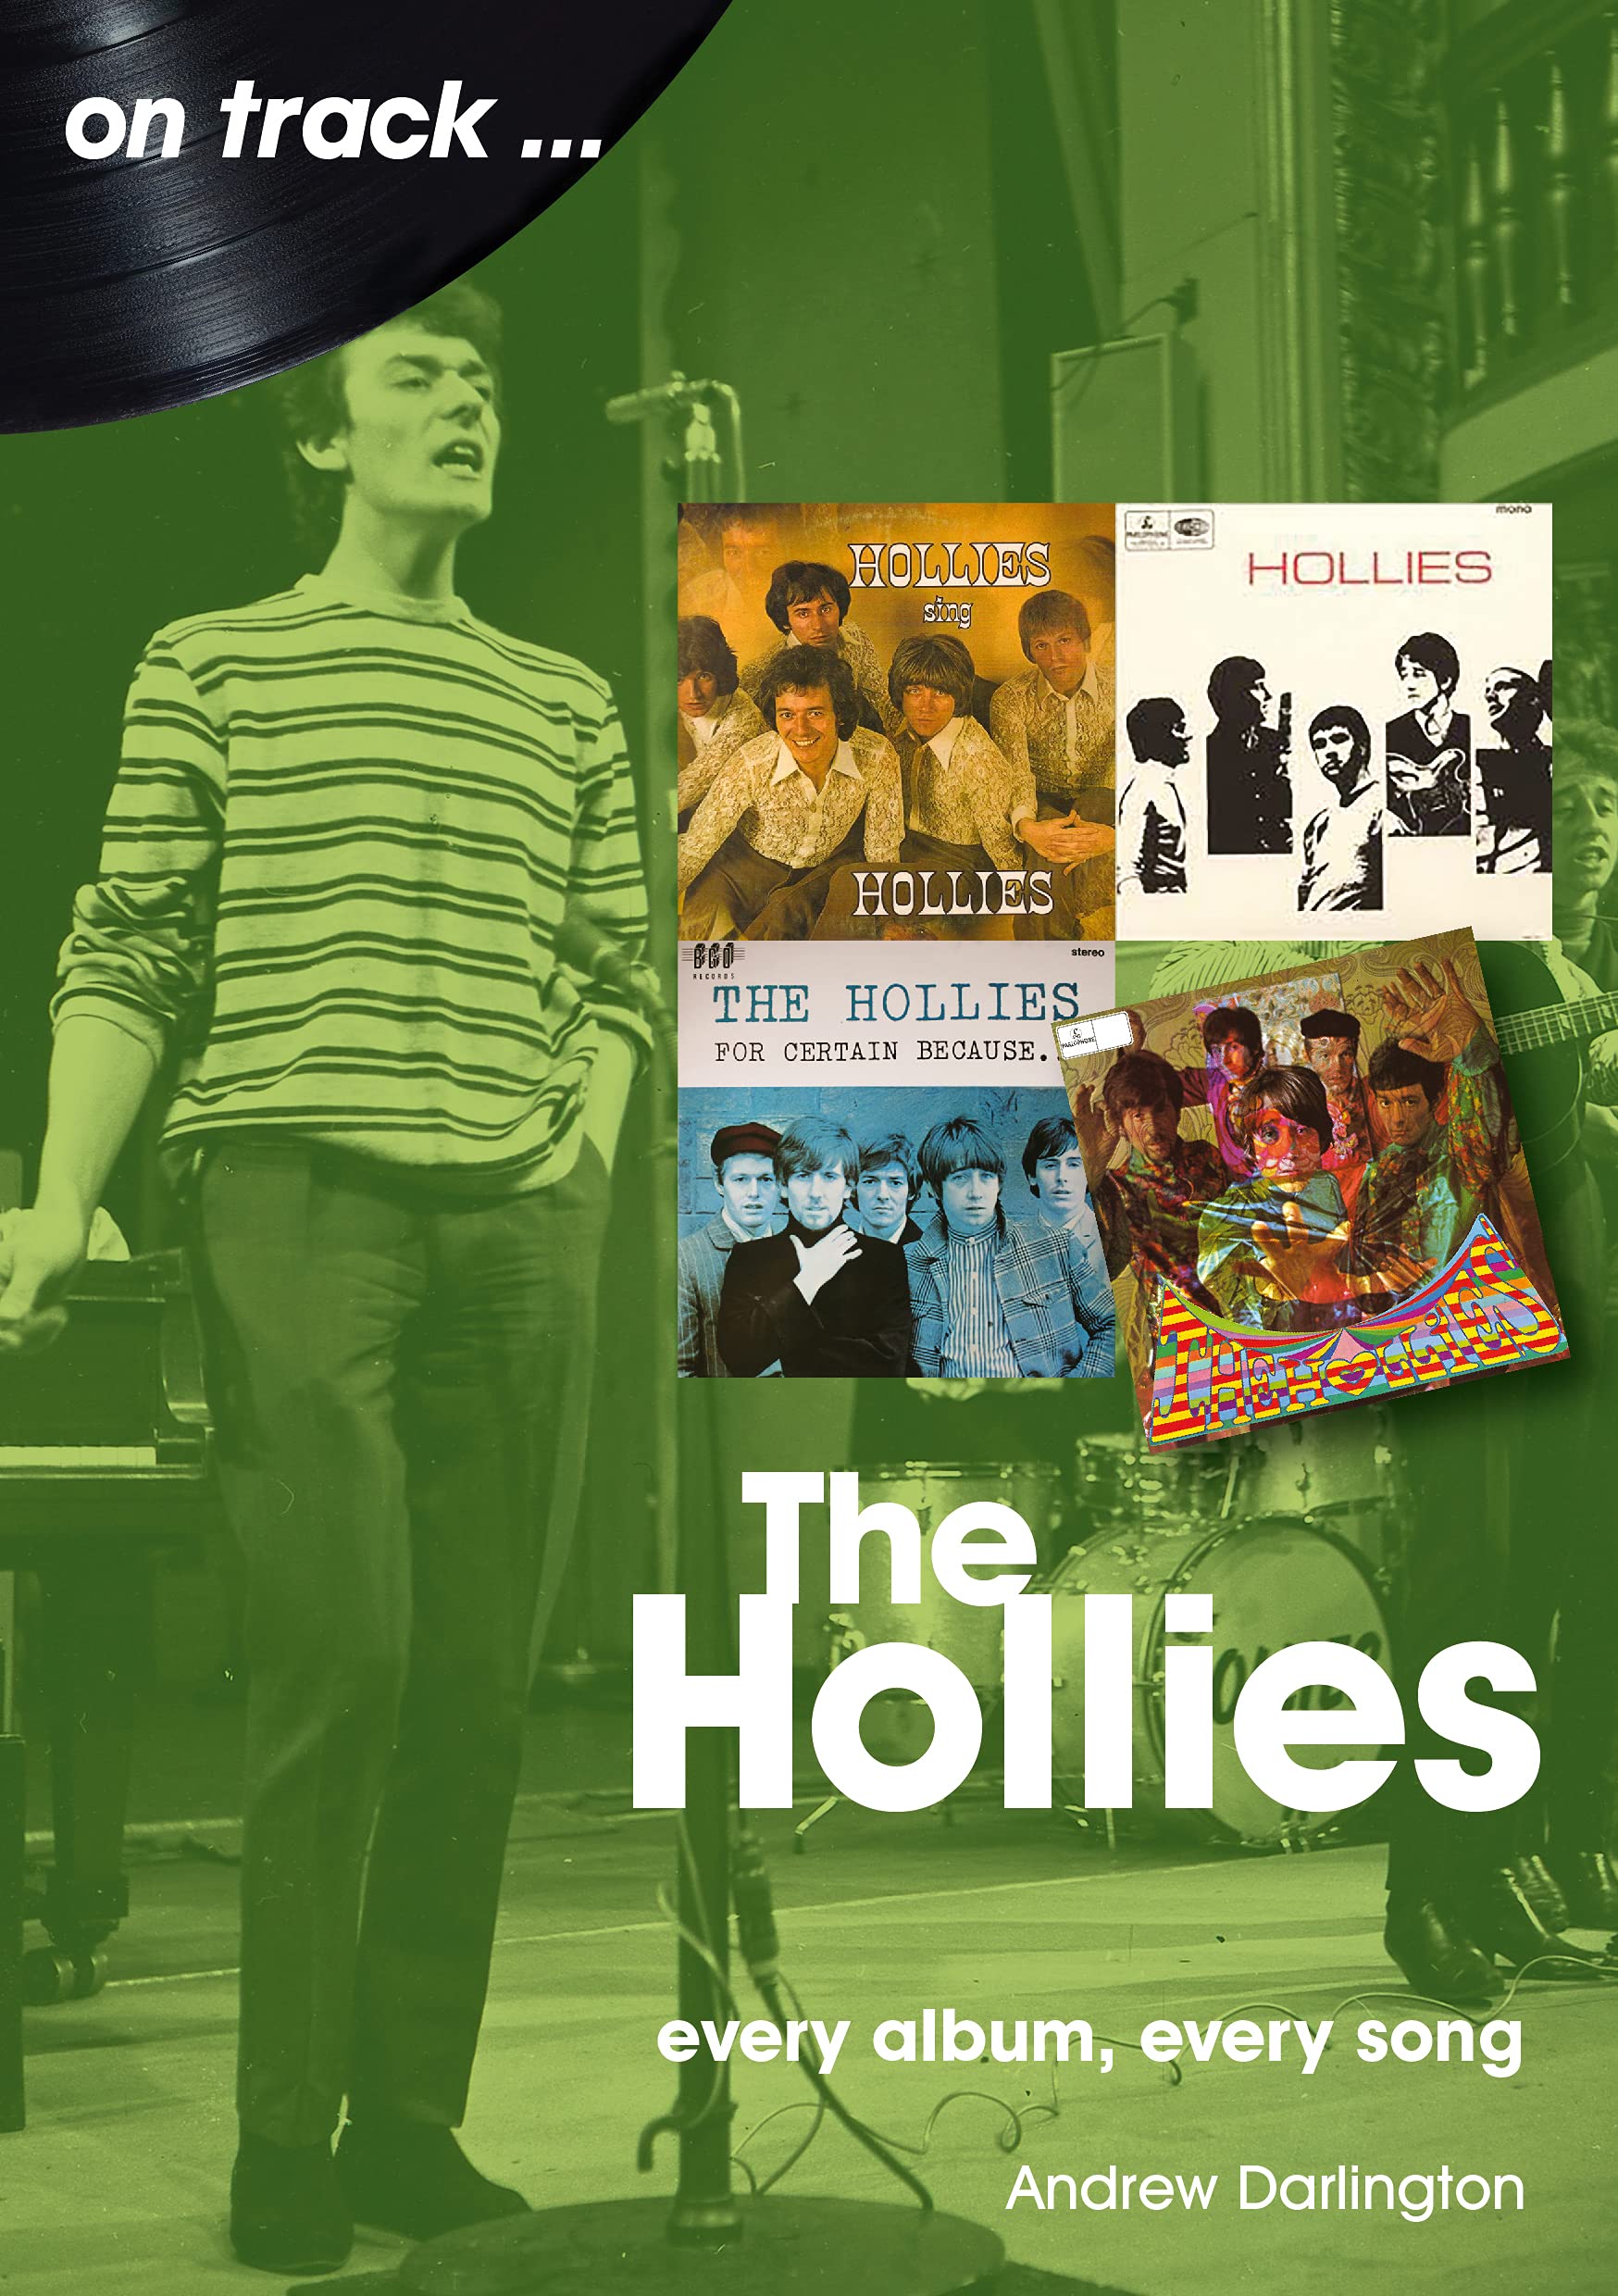 The Hollies - Every album, every track